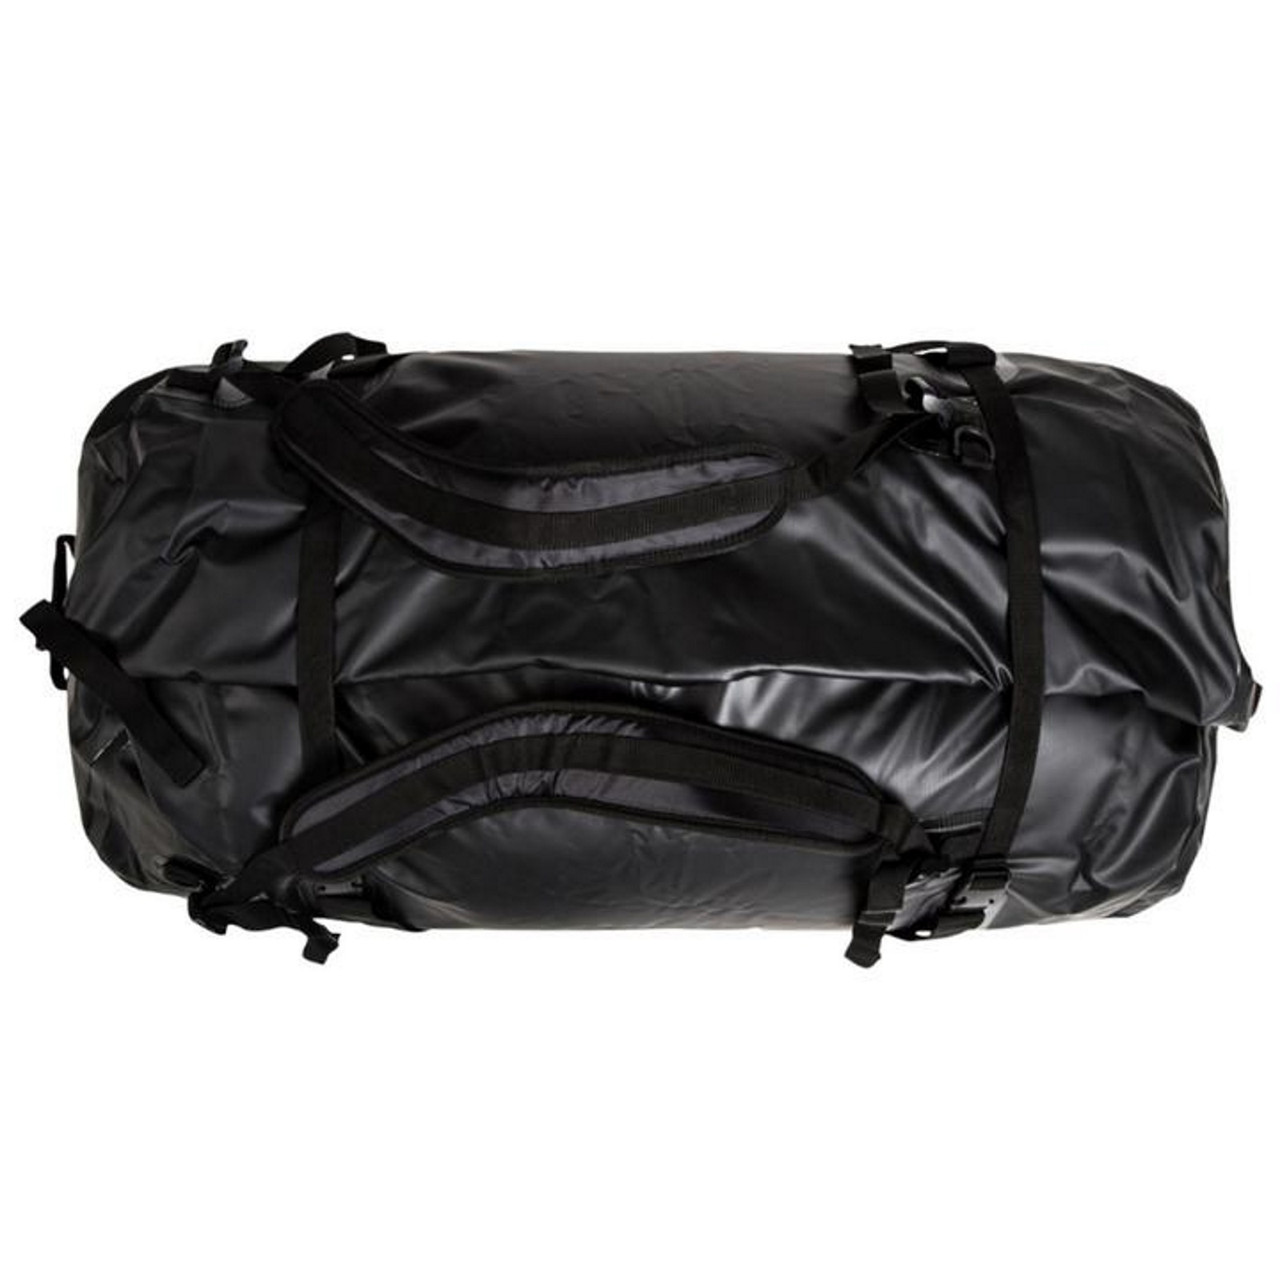 Caribee Expedition 120L Gear Bag at Luggage Superstore